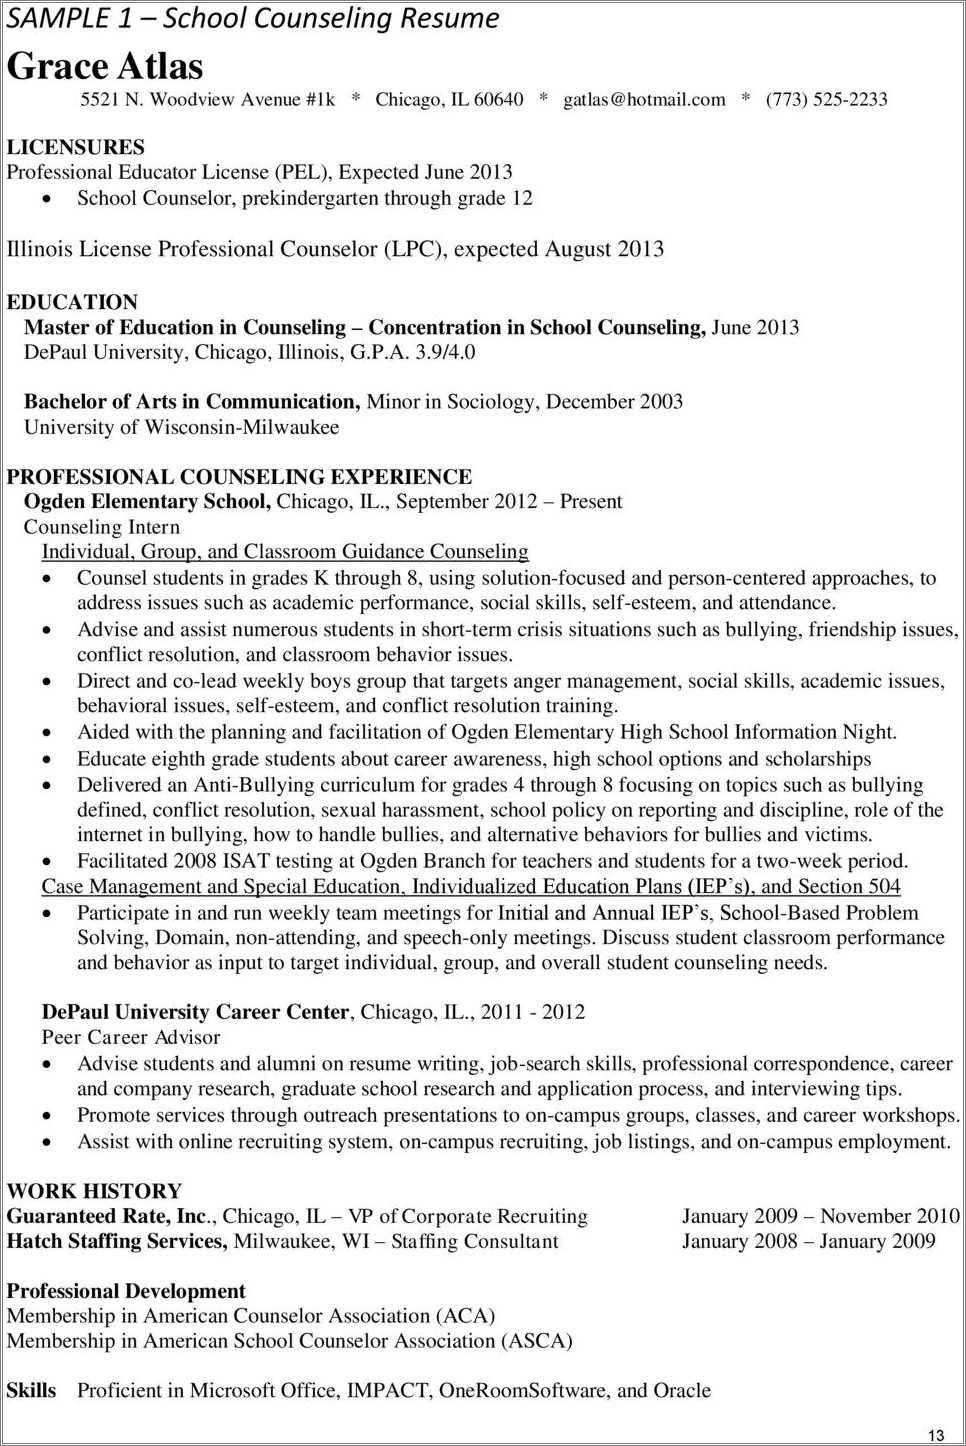 School Counselor Resume For New Graduate